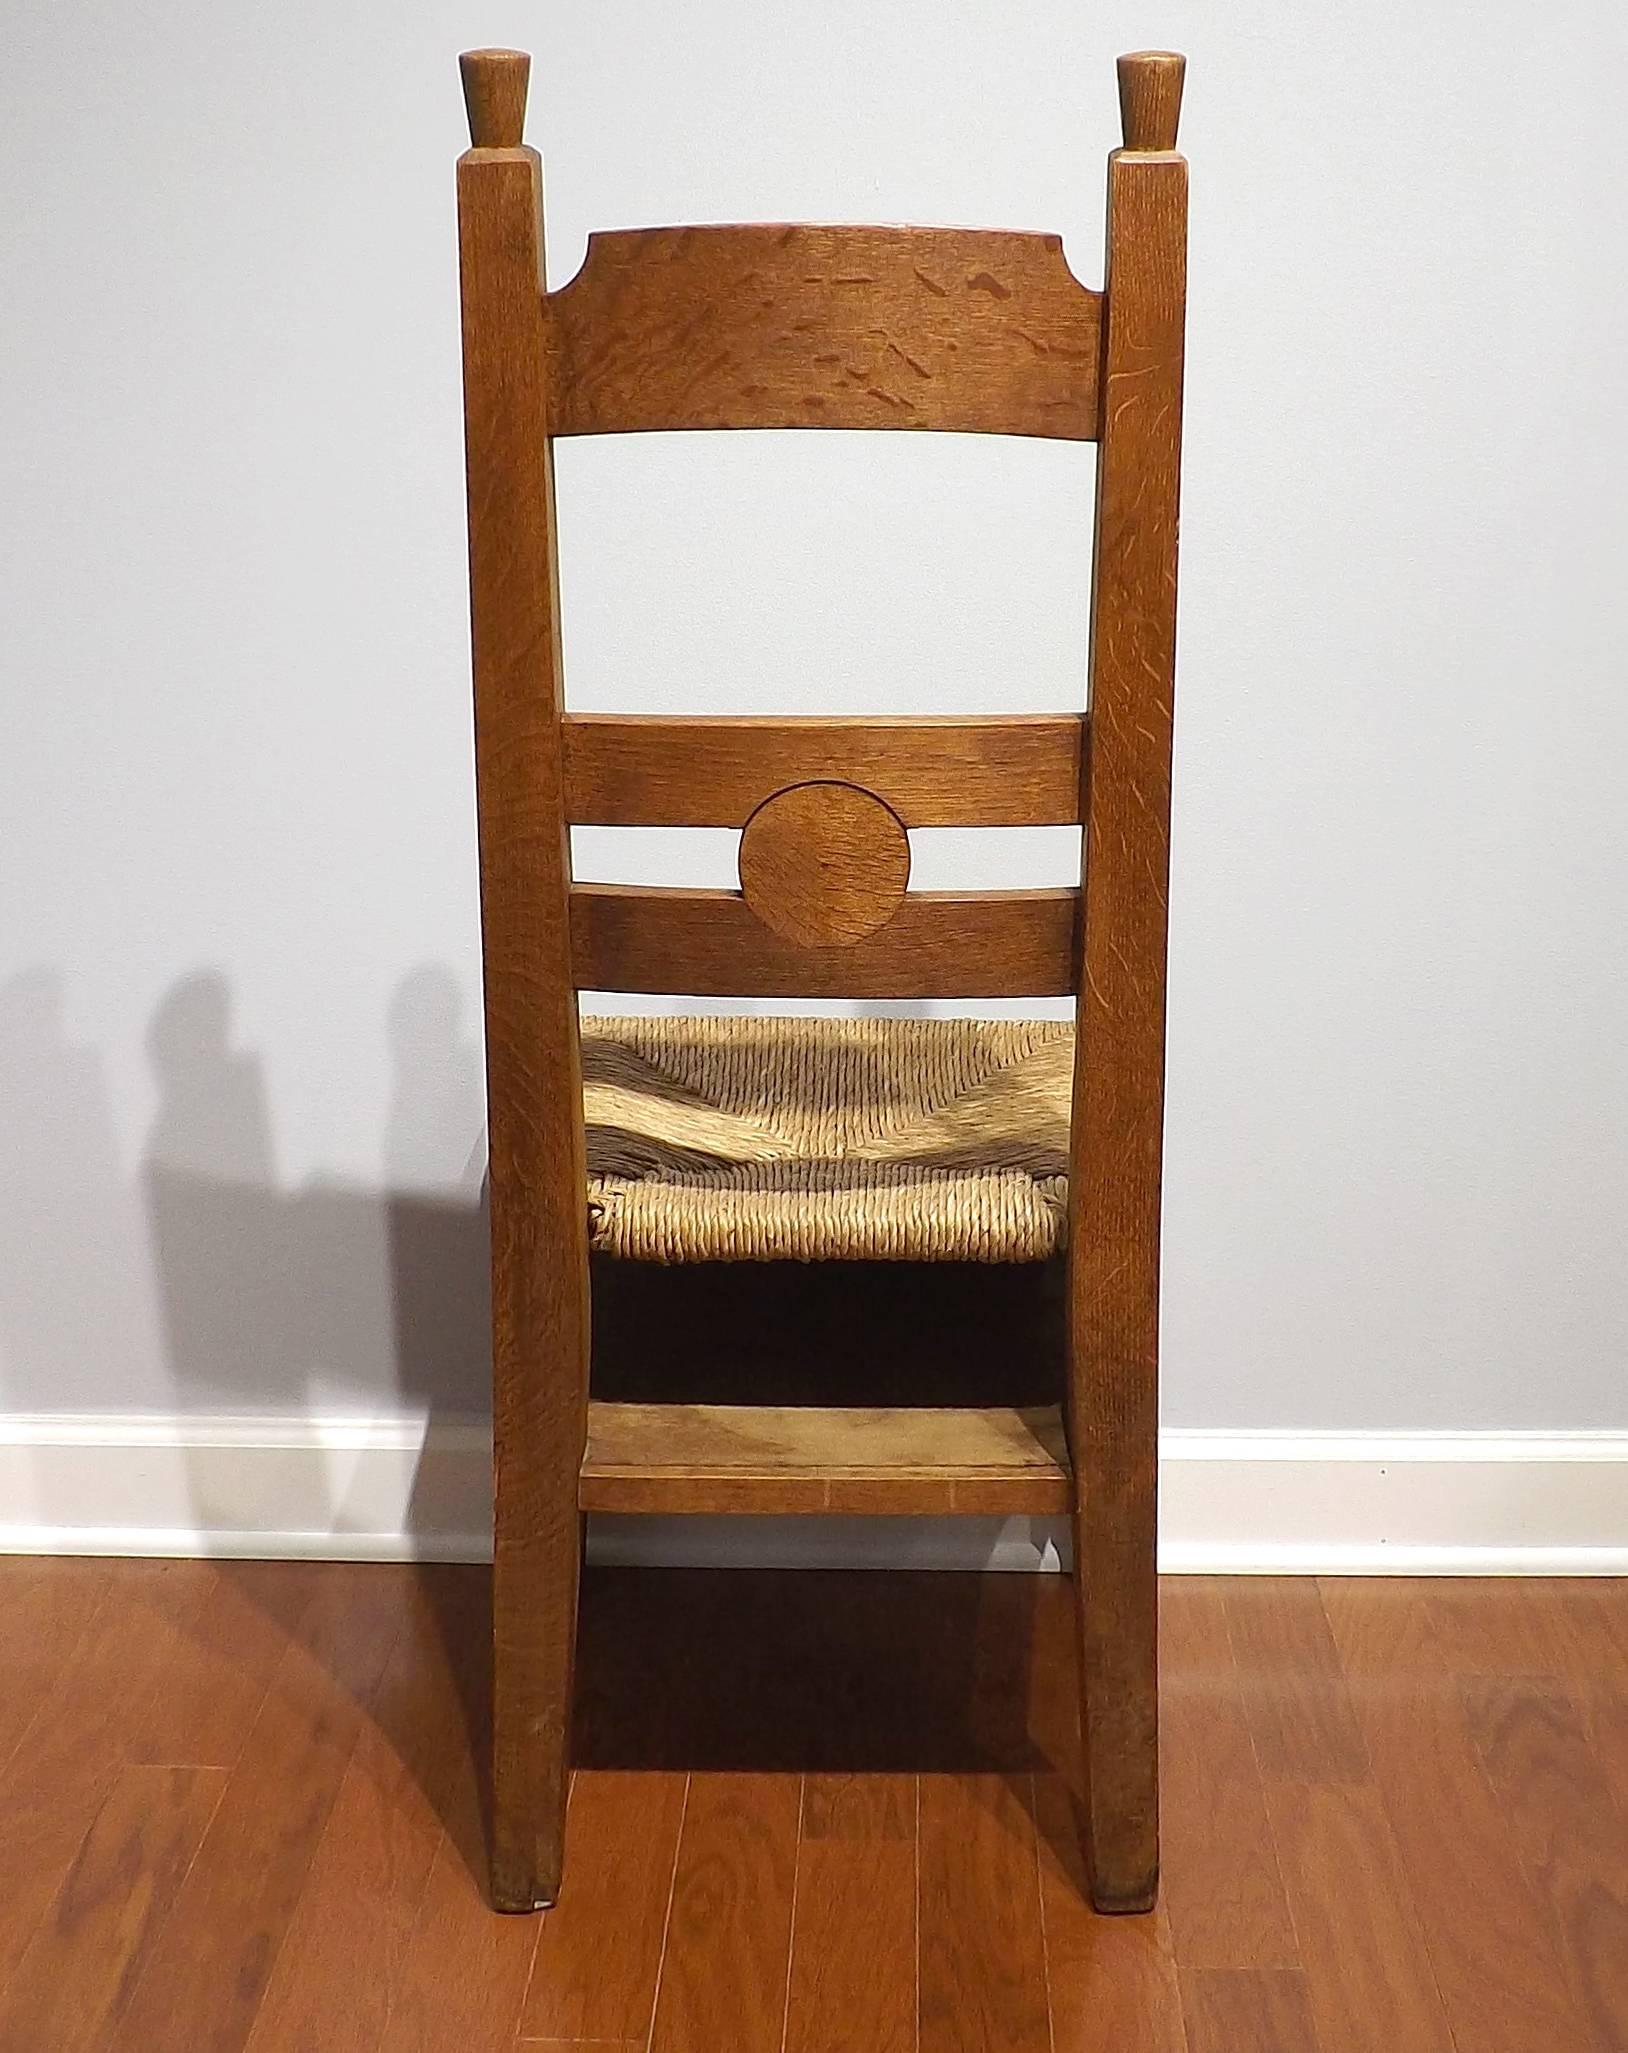 Carved Collection of Dutch Arts and Crafts Church Chairs 'Alpha - Omega', circa 1910 For Sale